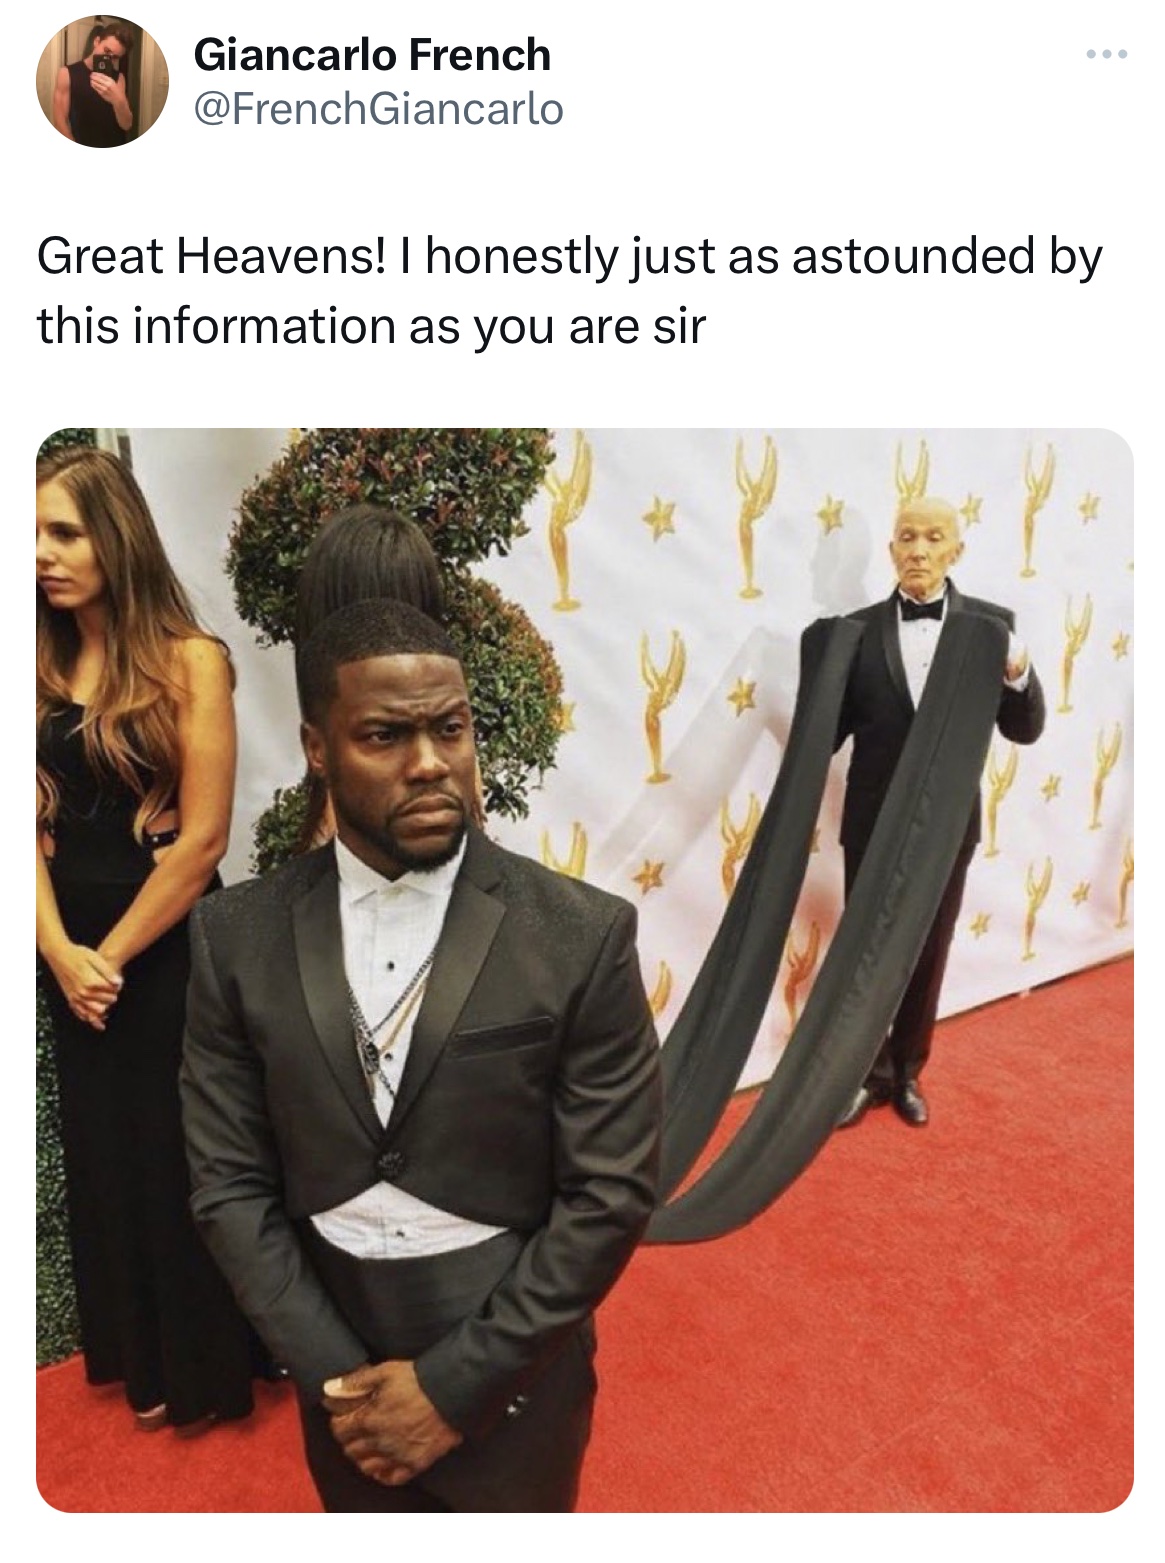 Kevin Hart trending memes - gentleman - Giancarlo French Great Heavens! I honestly just as astounded by this information as you are sir